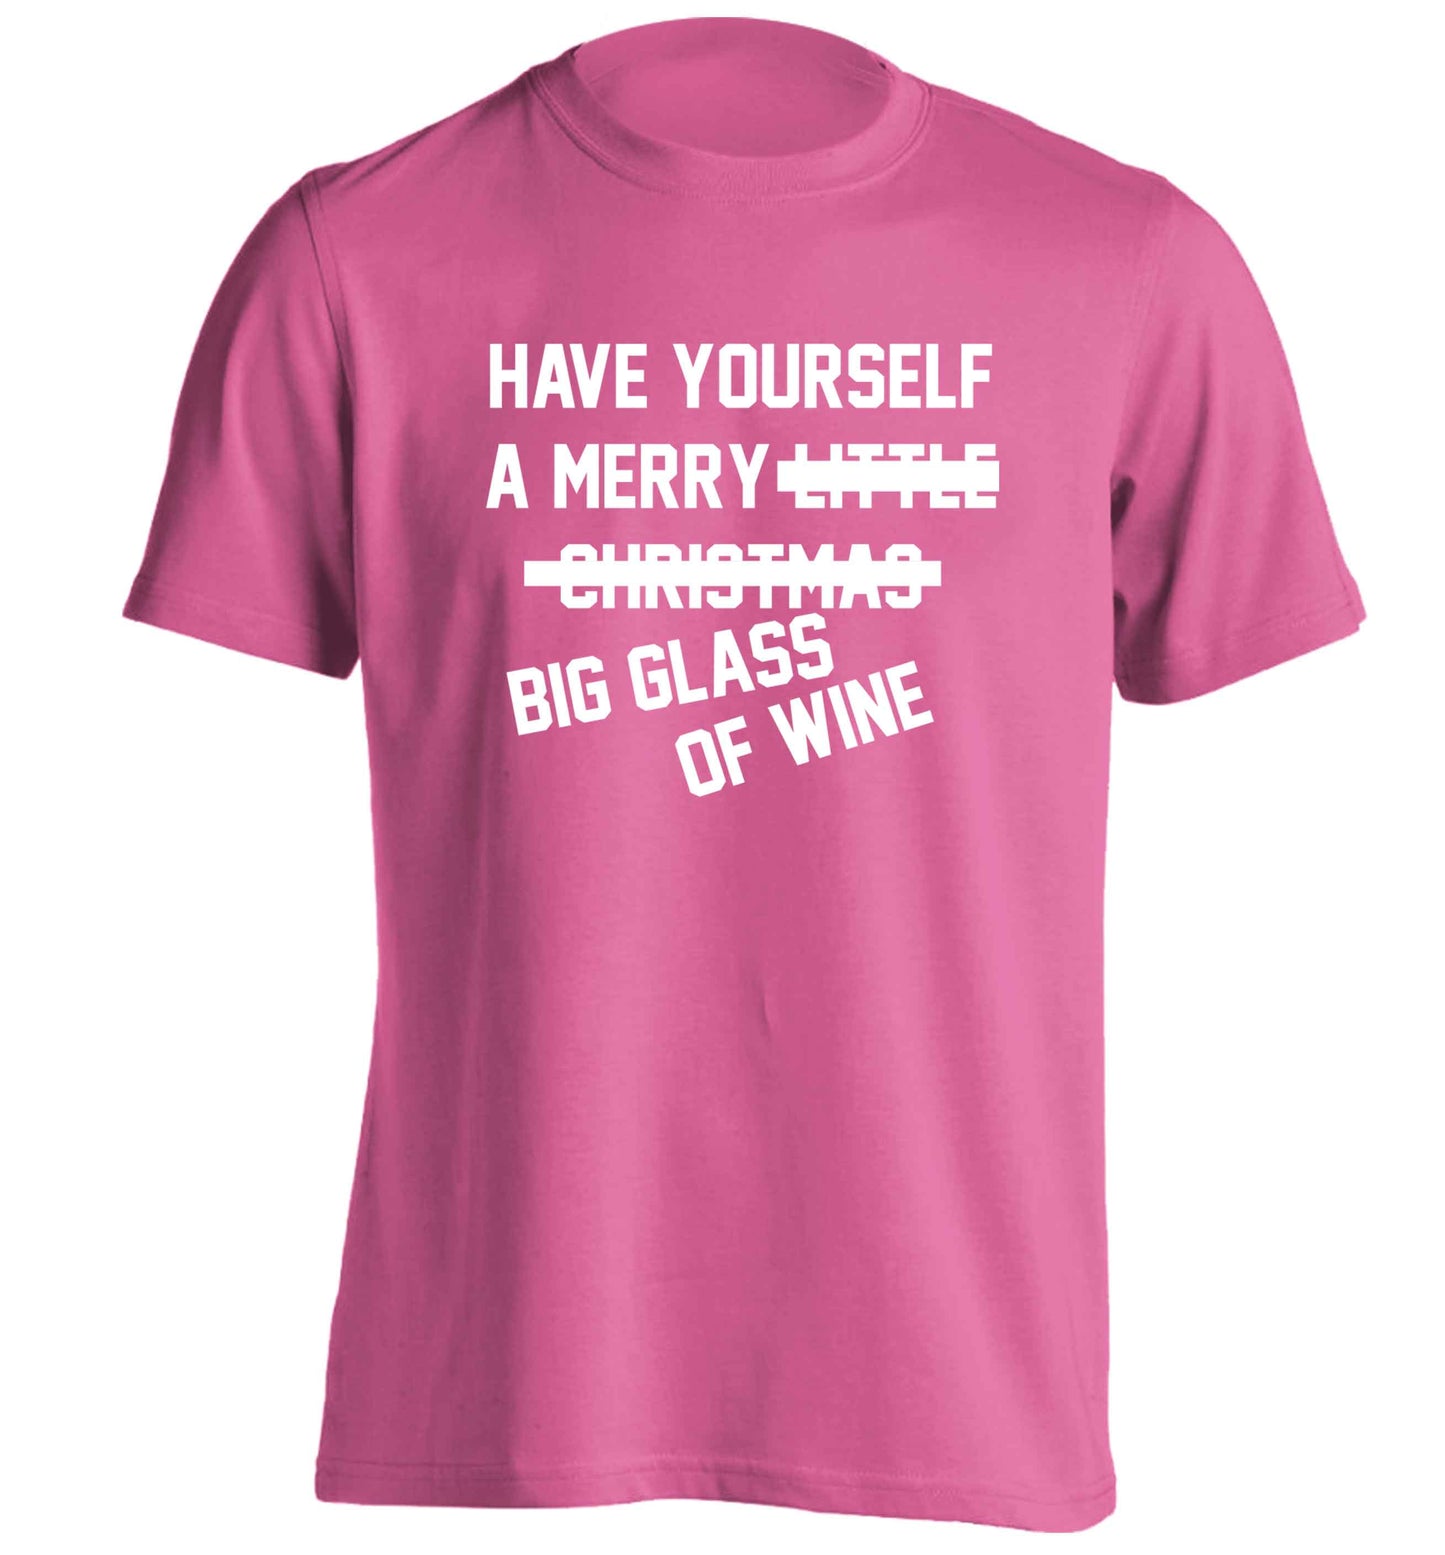 Have yourself a merry big glass of wine adults unisex pink Tshirt 2XL